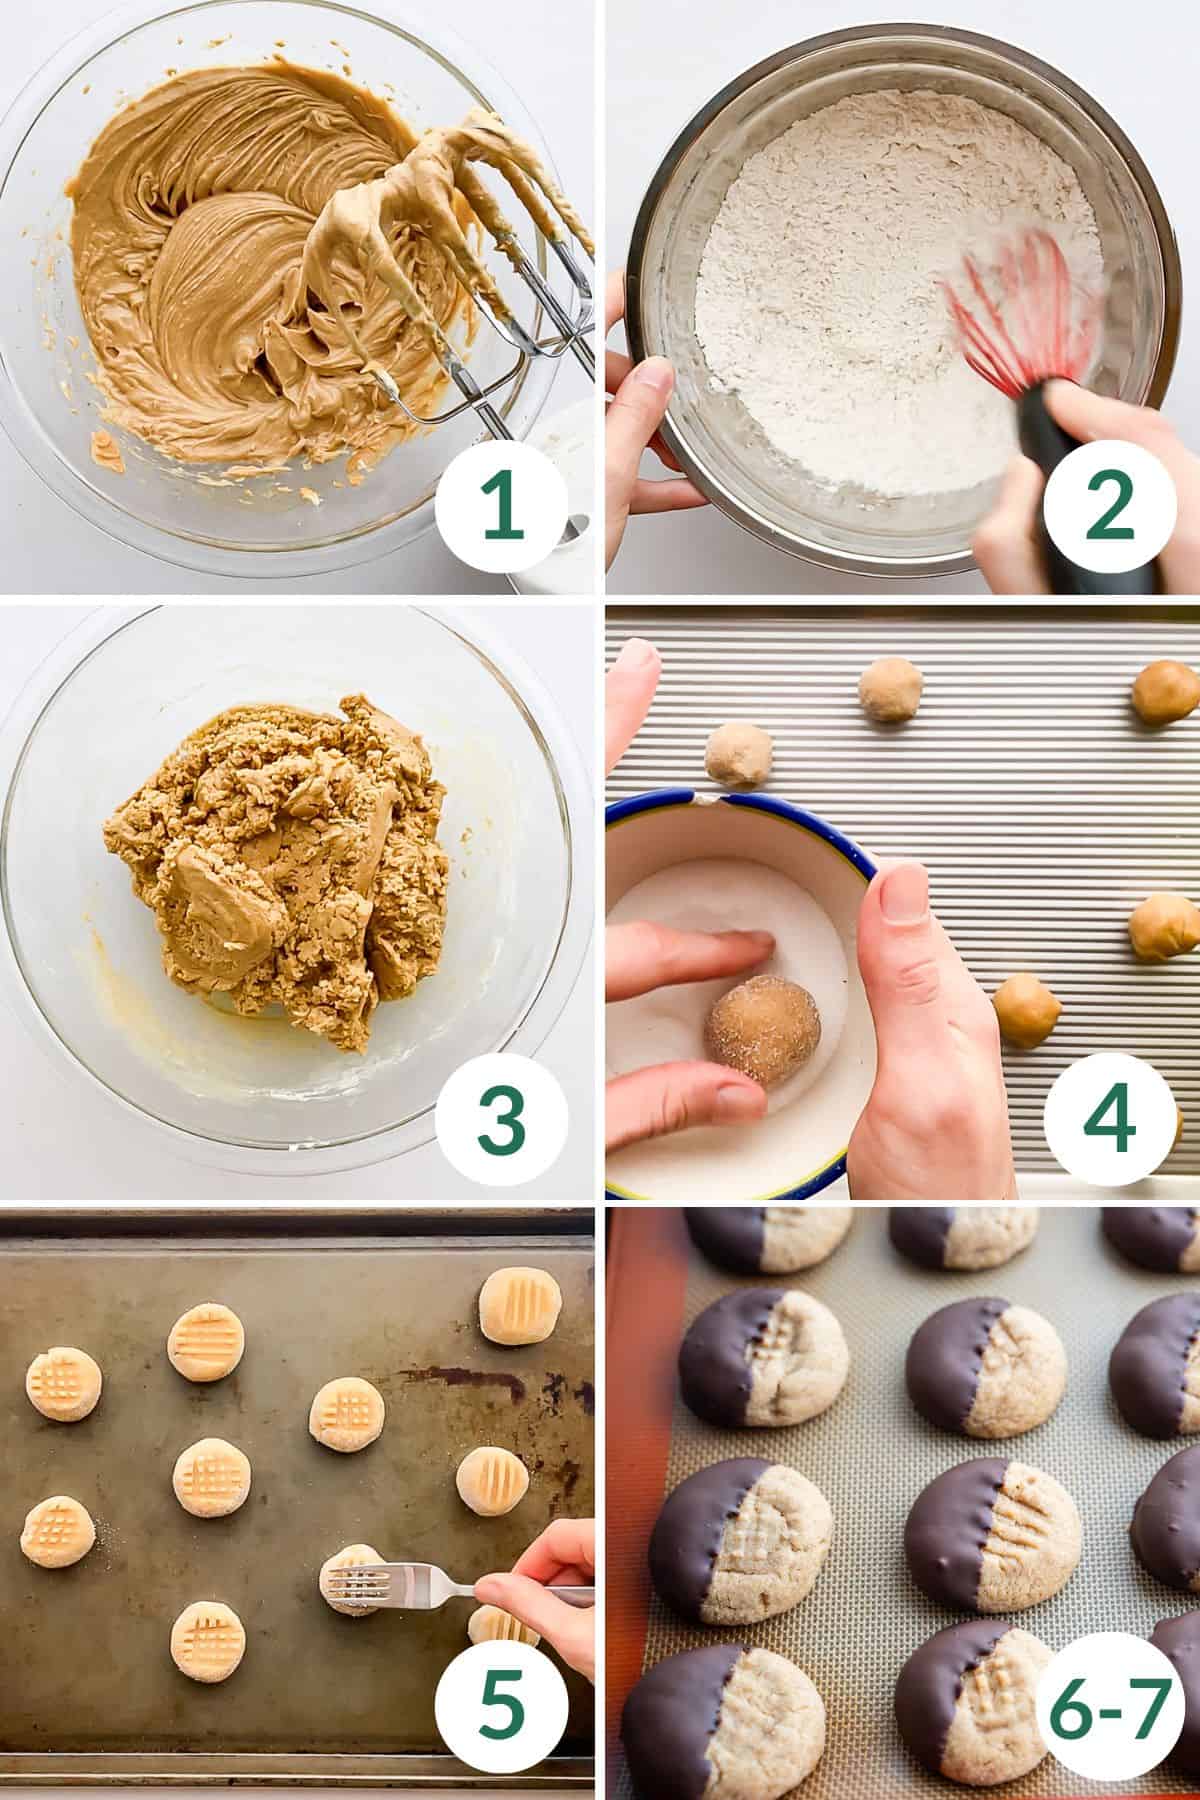 How to make gluten free peanut butter cookies in 7 steps, including mixing ingredients, forming cookies, and dipping them in chocolate.